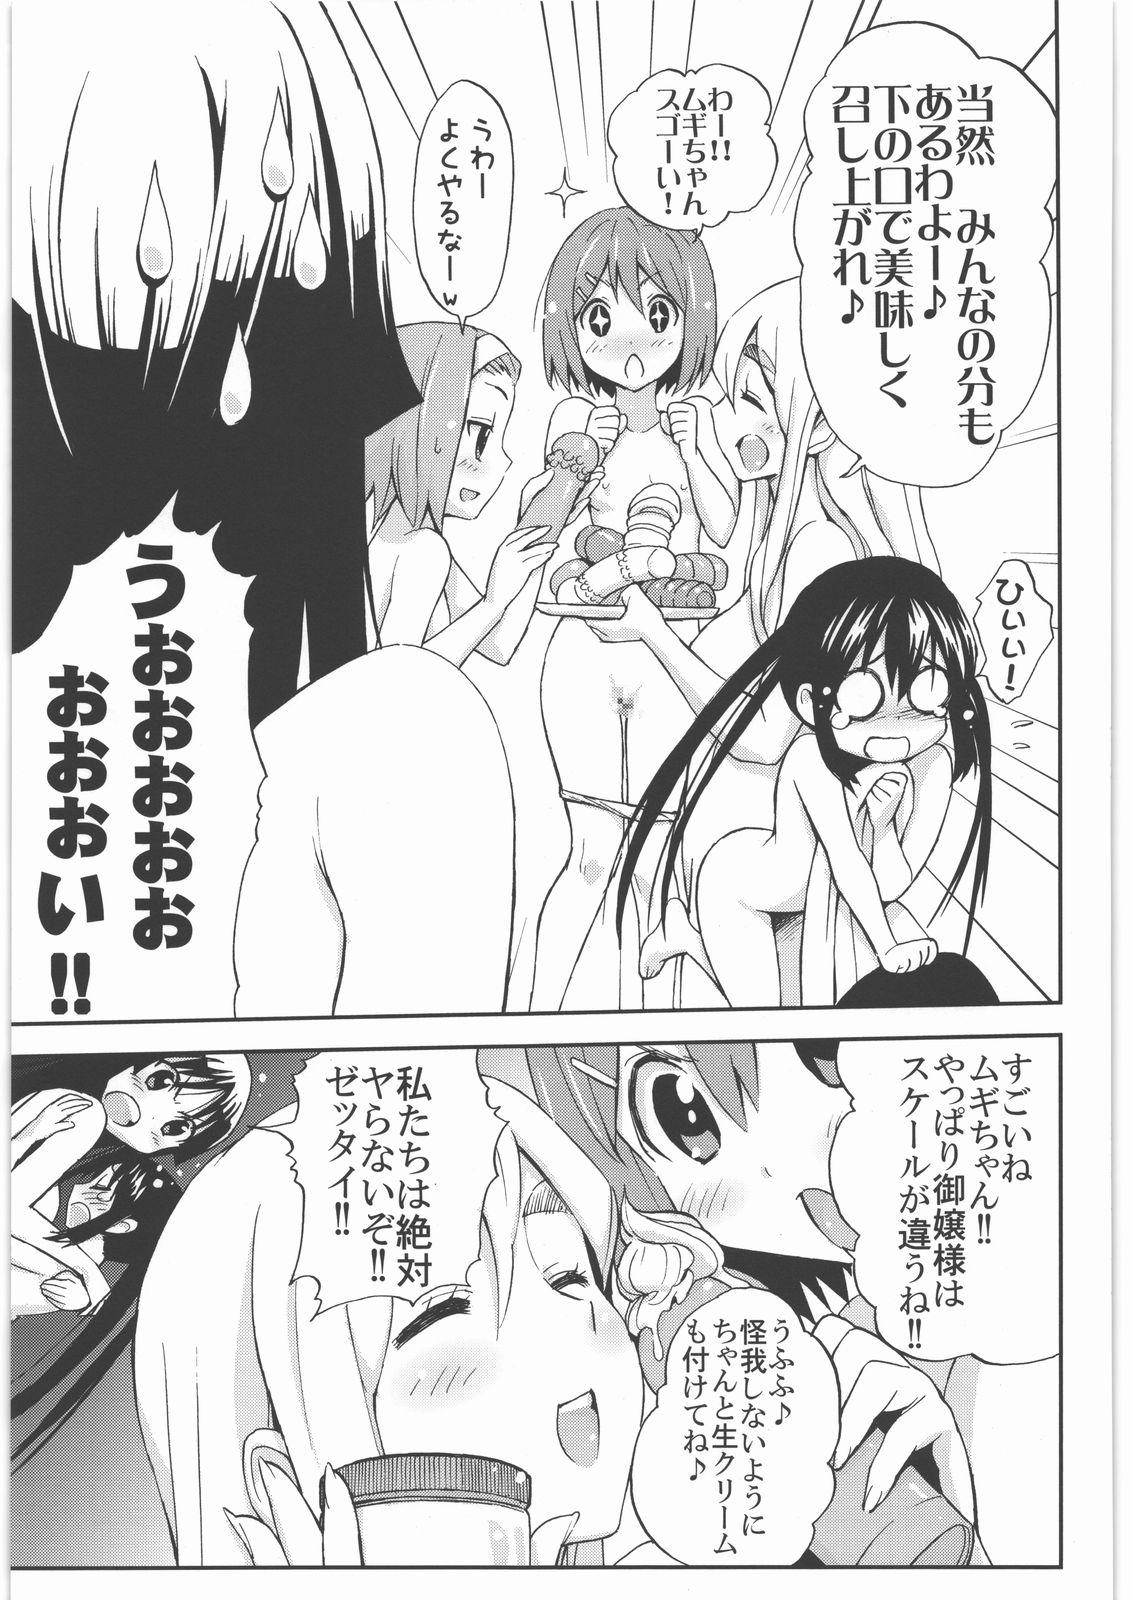 Orgy Come!Come!Erotick - K-on Hidden - Page 8